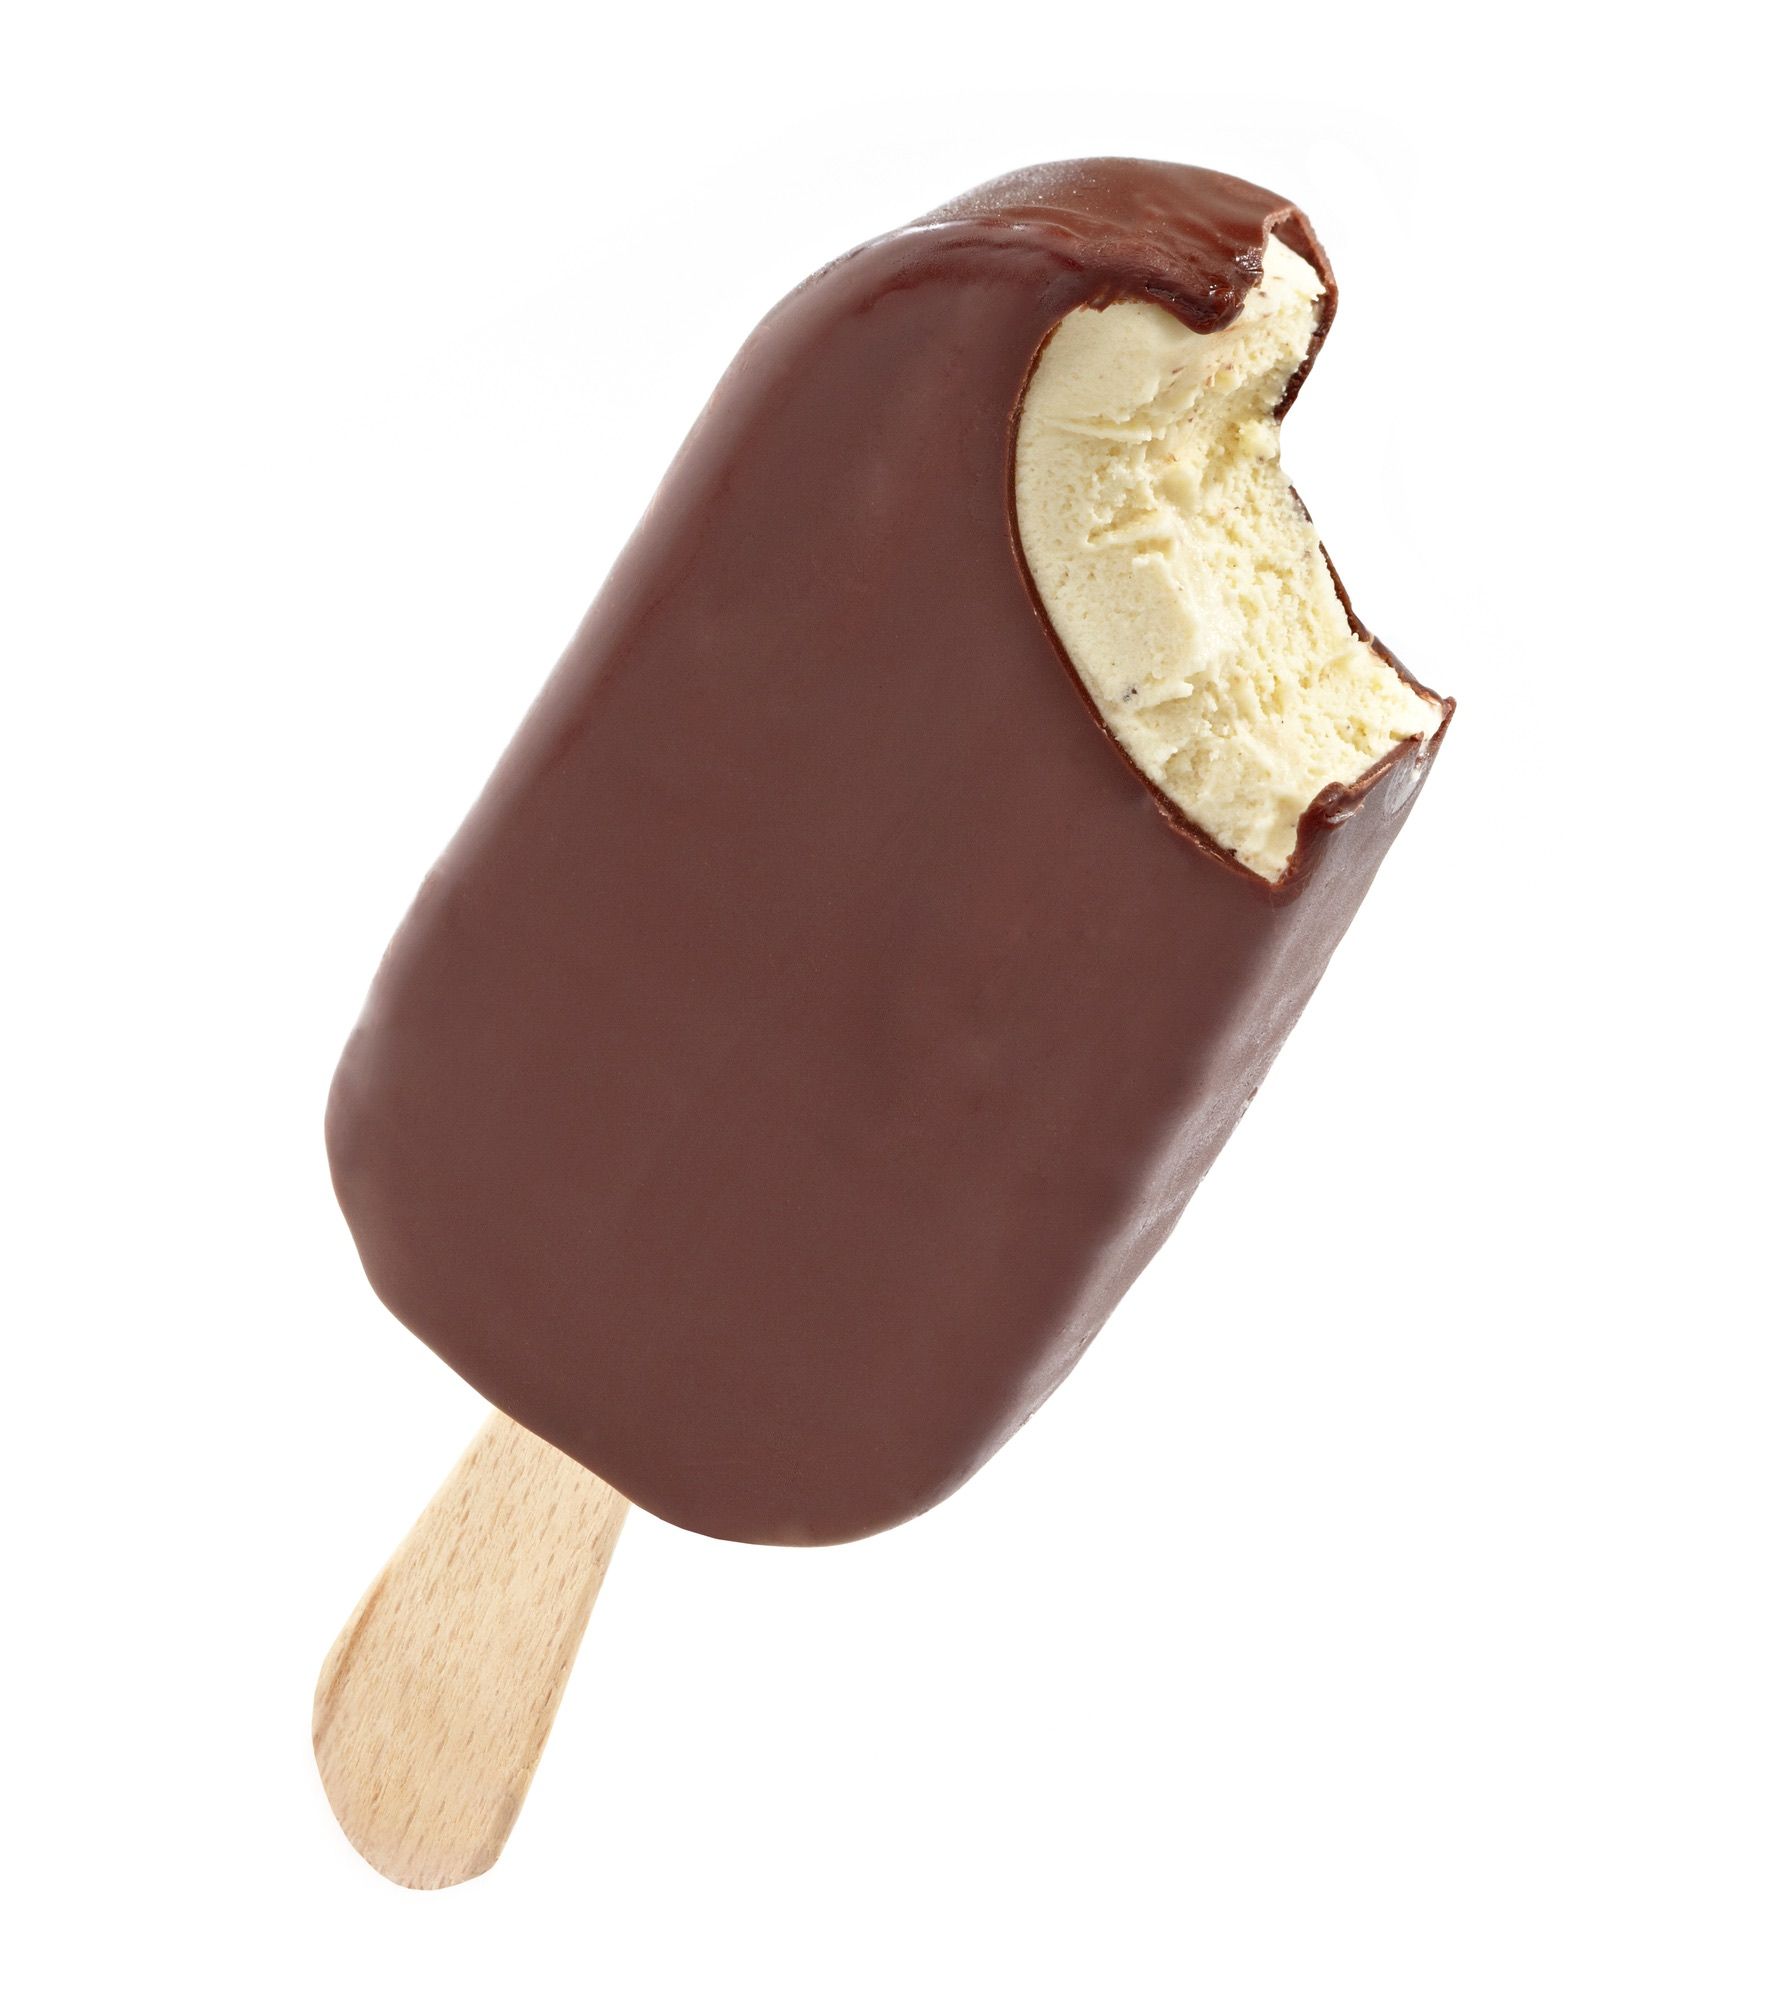 Häagen-Dazs Class Action Says Ice Cream Bars Contain Vegetable Oil - Top  Class Actions